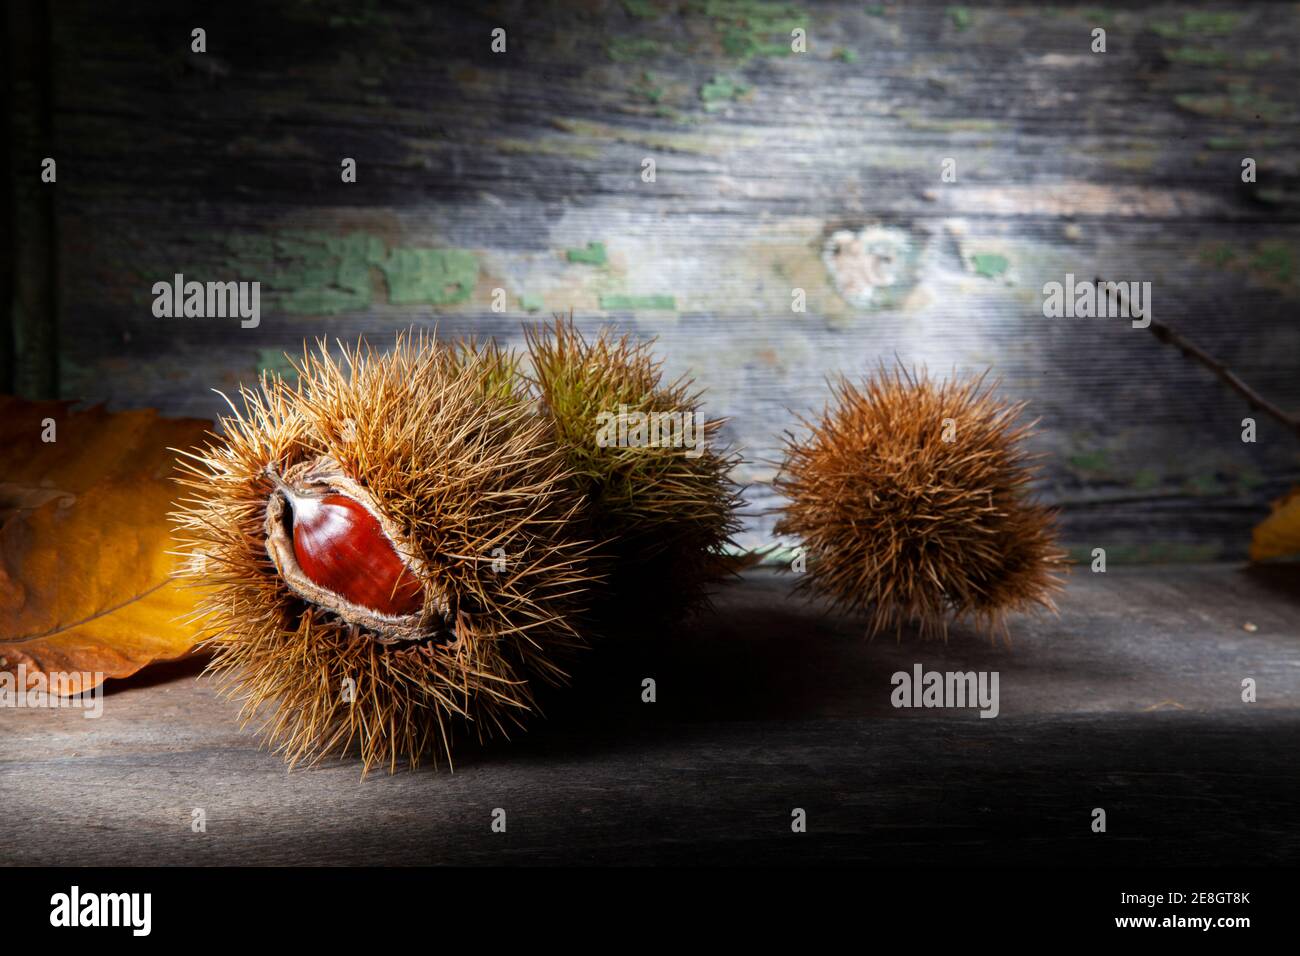 Autumn Still Life of Chestnut With Dried  Shells. Macro Photo  On Wooden Table With Decayed Background. Taken With Spotlight in Studio Stock Photo